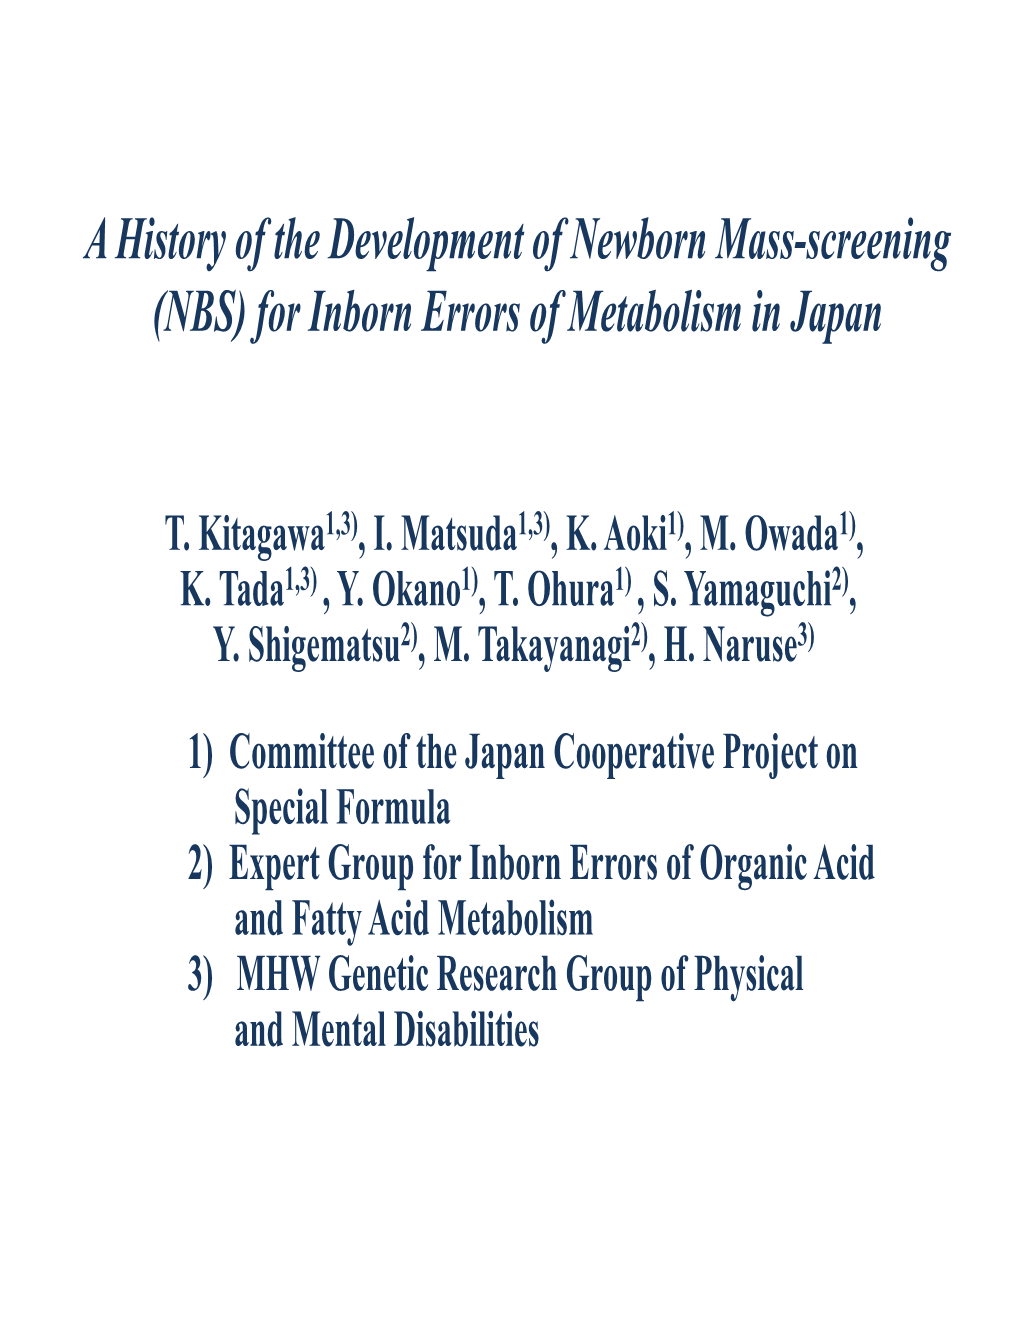 A History of the Development of Newborn Mass-Screening (NBS) for Inborn Errors of Metabolism in Japan